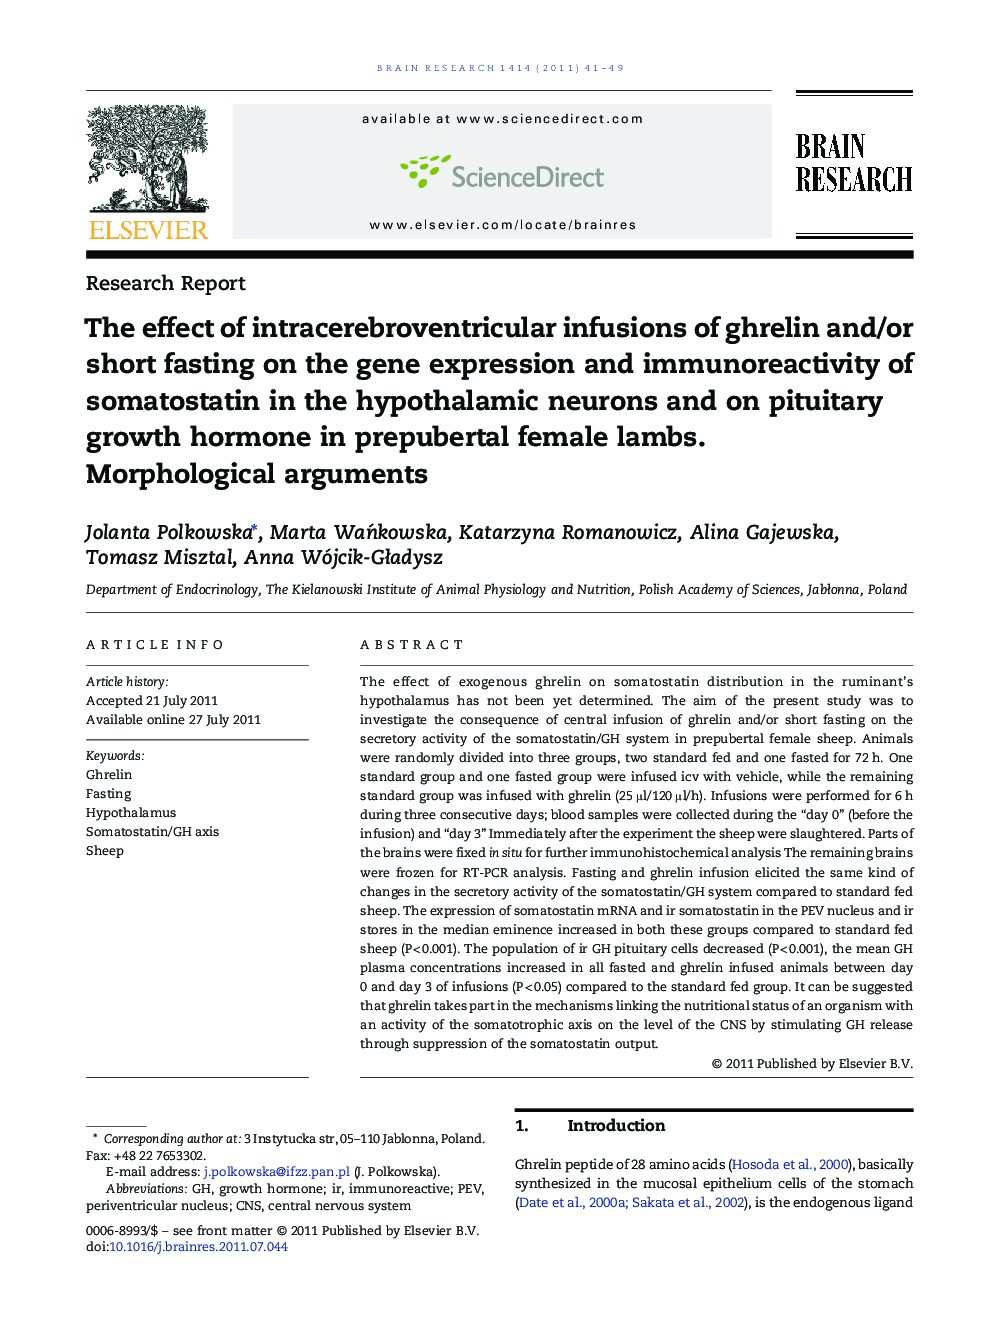 The effect of intracerebroventricular infusions of ghrelin and/or short fasting on the gene expression and immunoreactivity of somatostatin in the hypothalamic neurons and on pituitary growth hormone in prepubertal female lambs. Morphological arguments